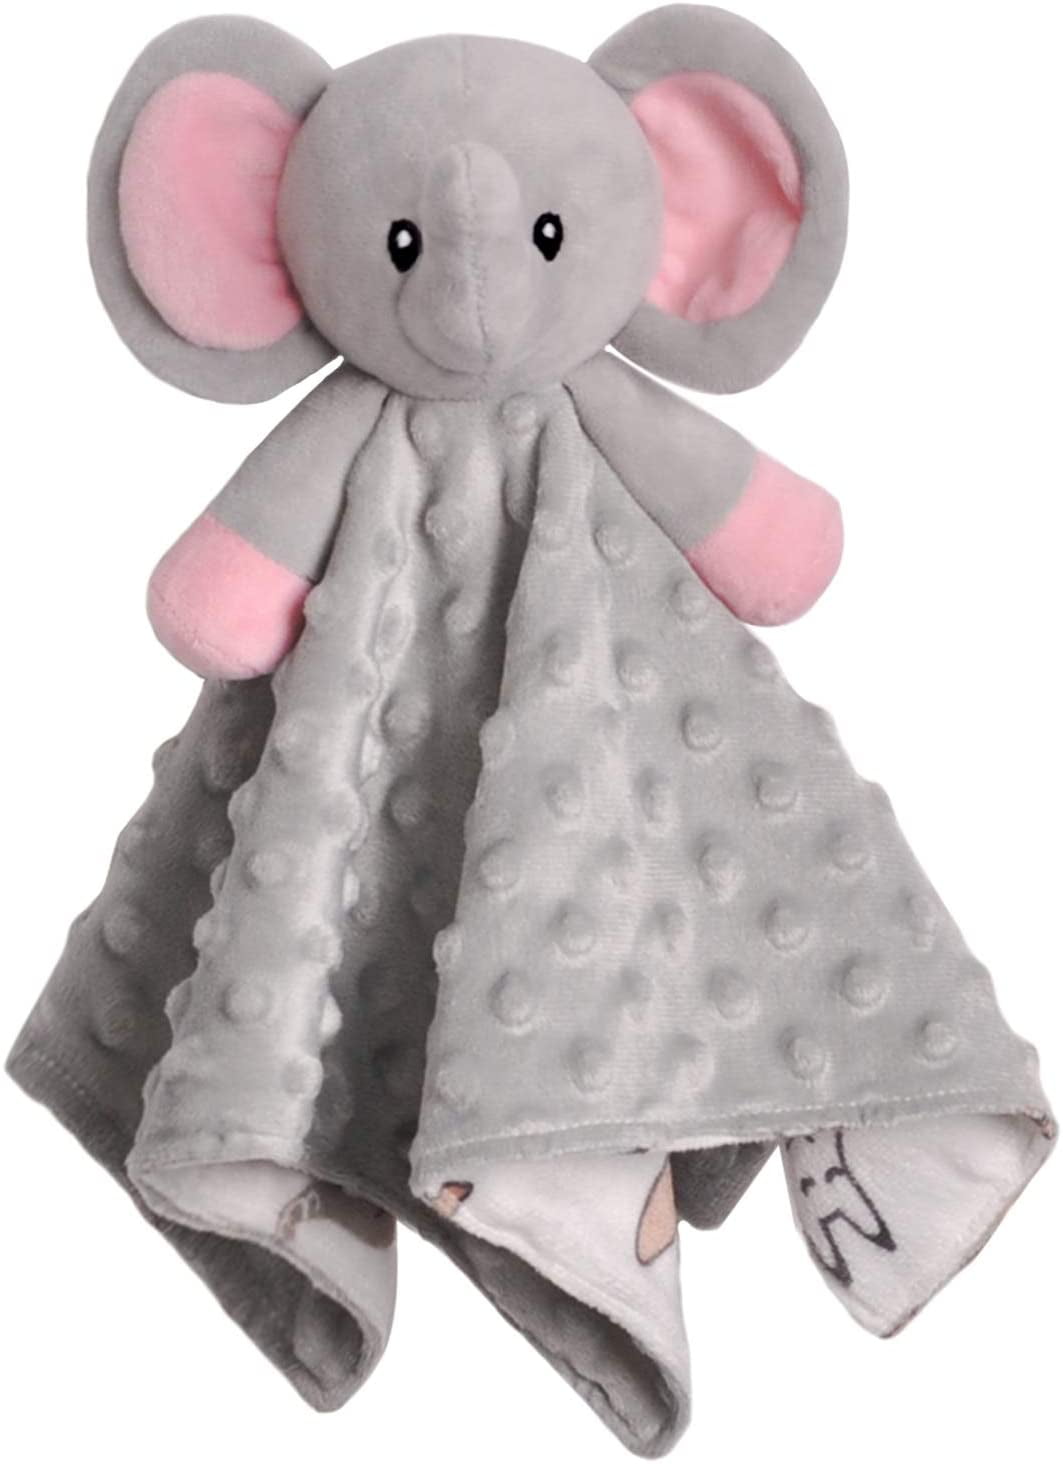 Infant Pink Elephant Baby Security Blanket Soft Stuffed Animal Plush Soothing Toy for Baby